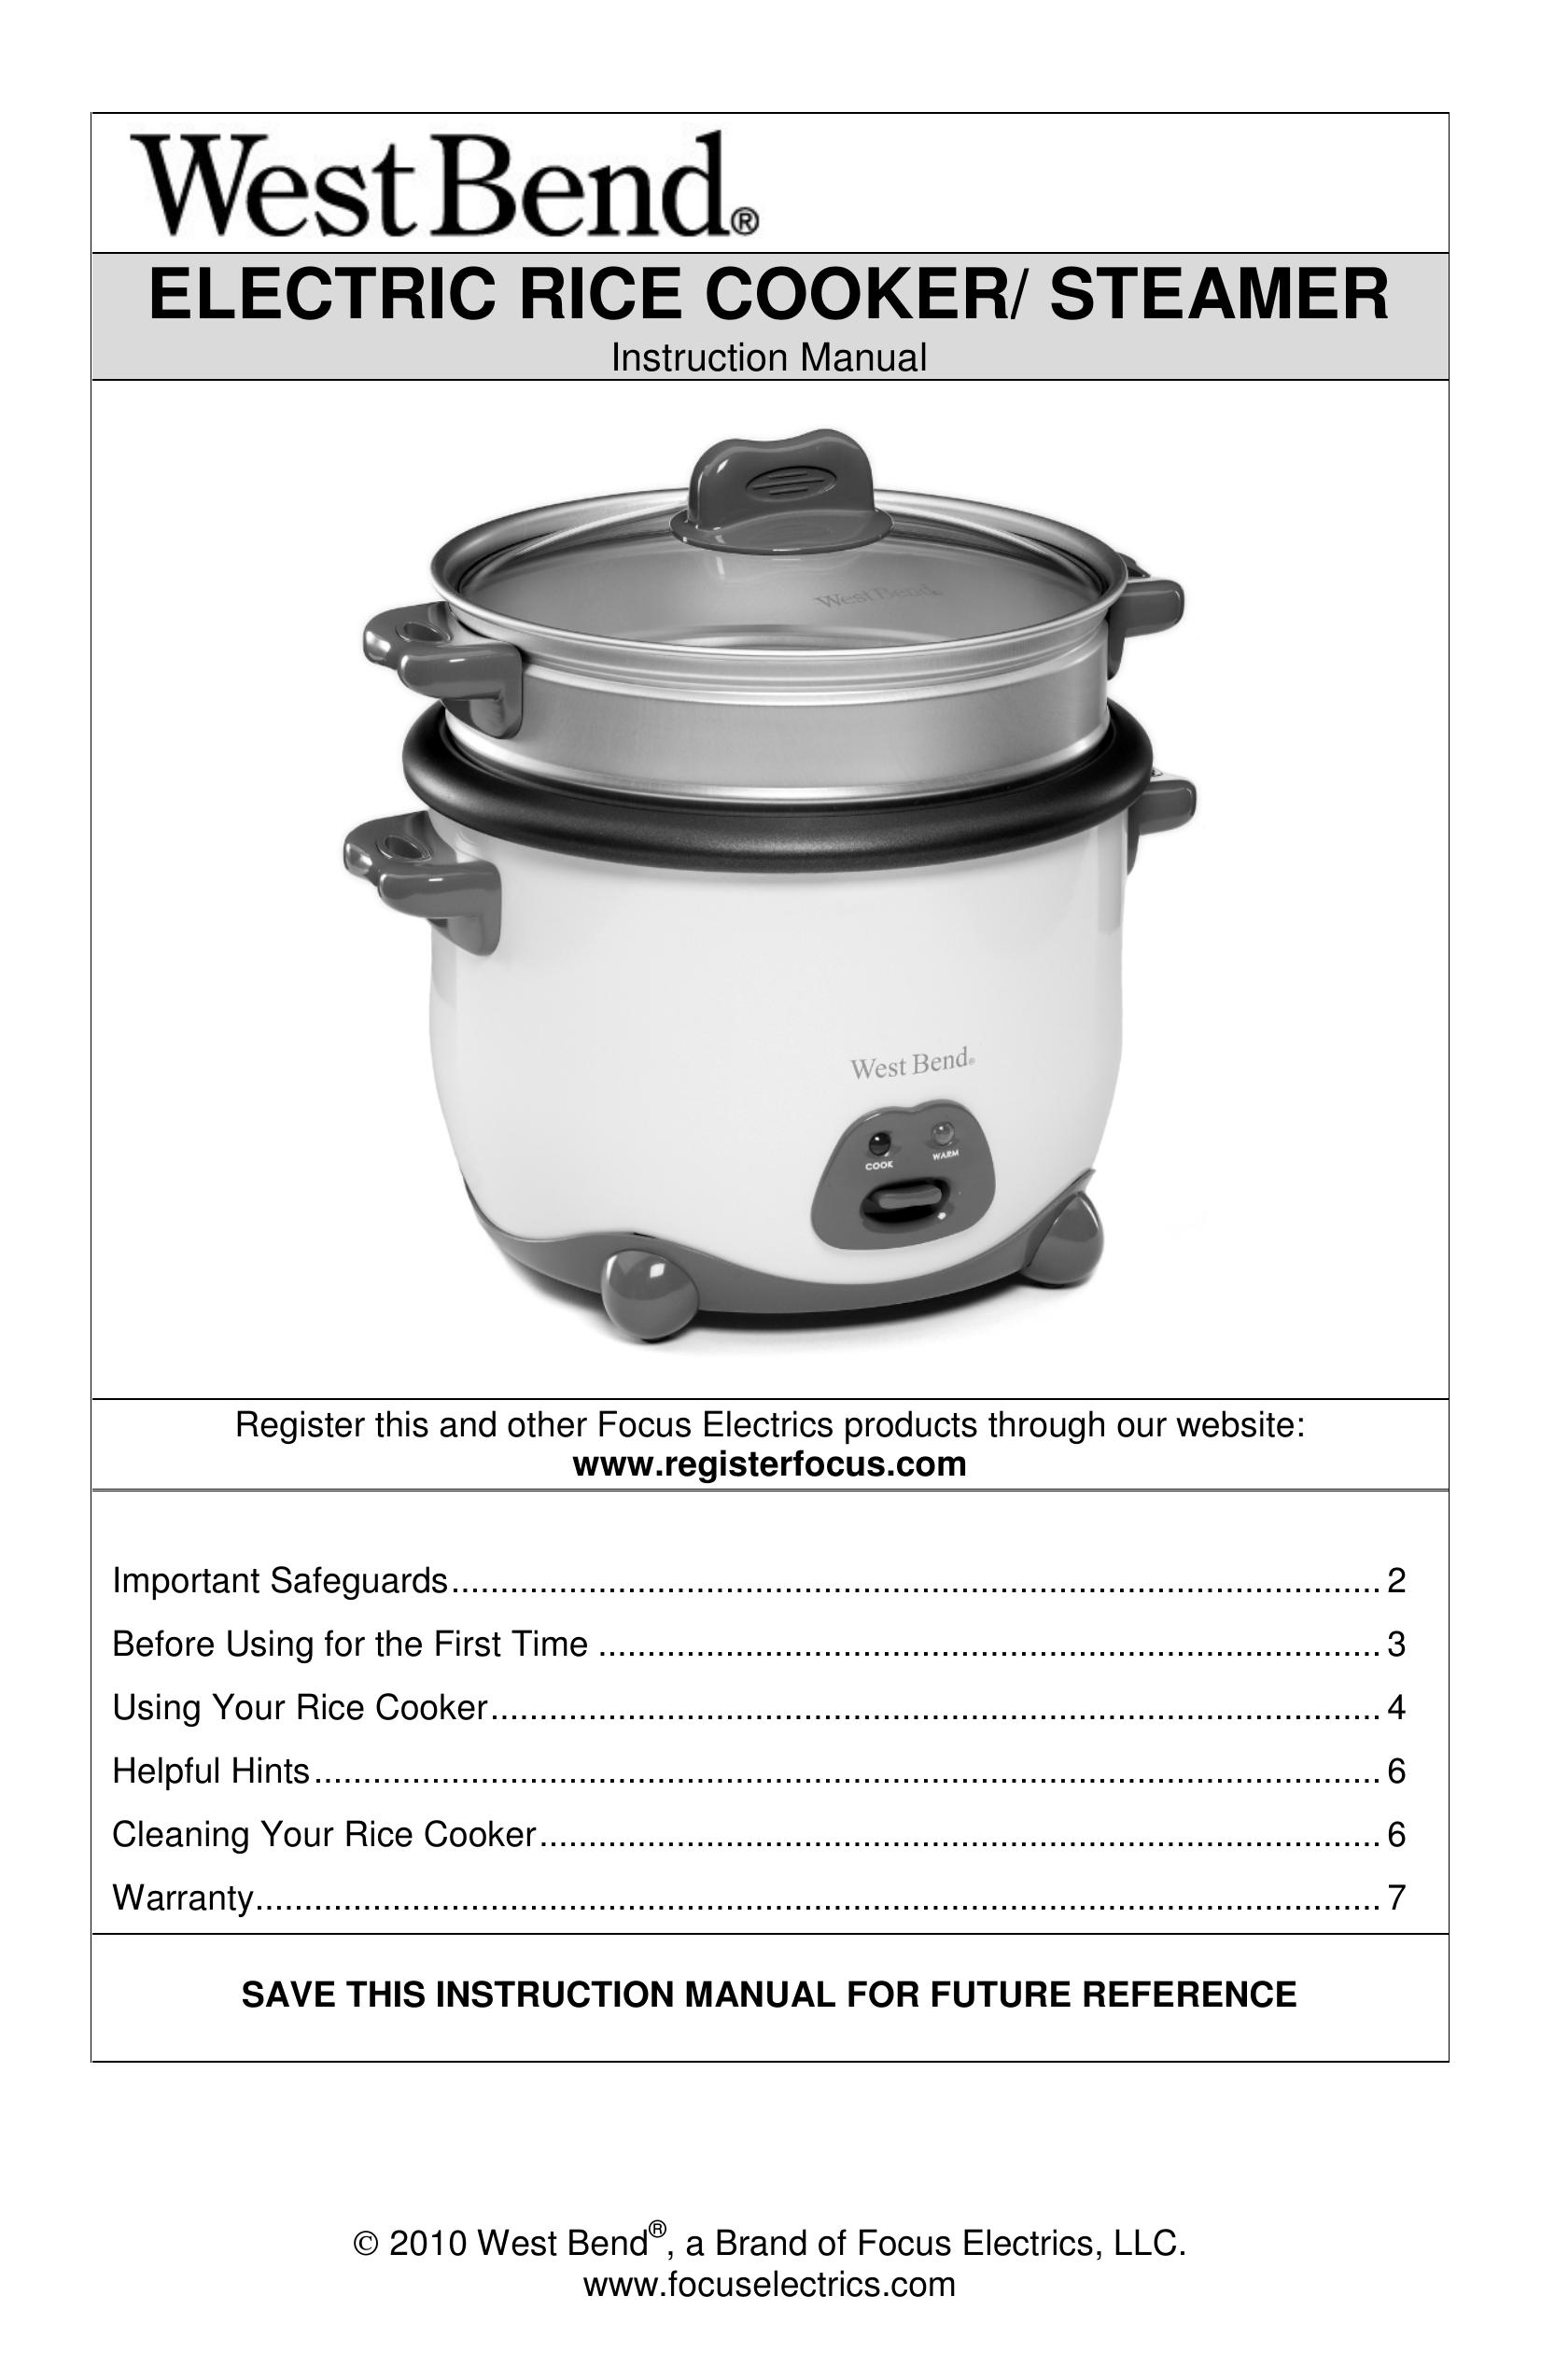 West Bend L5808 Rice Cooker User Manual